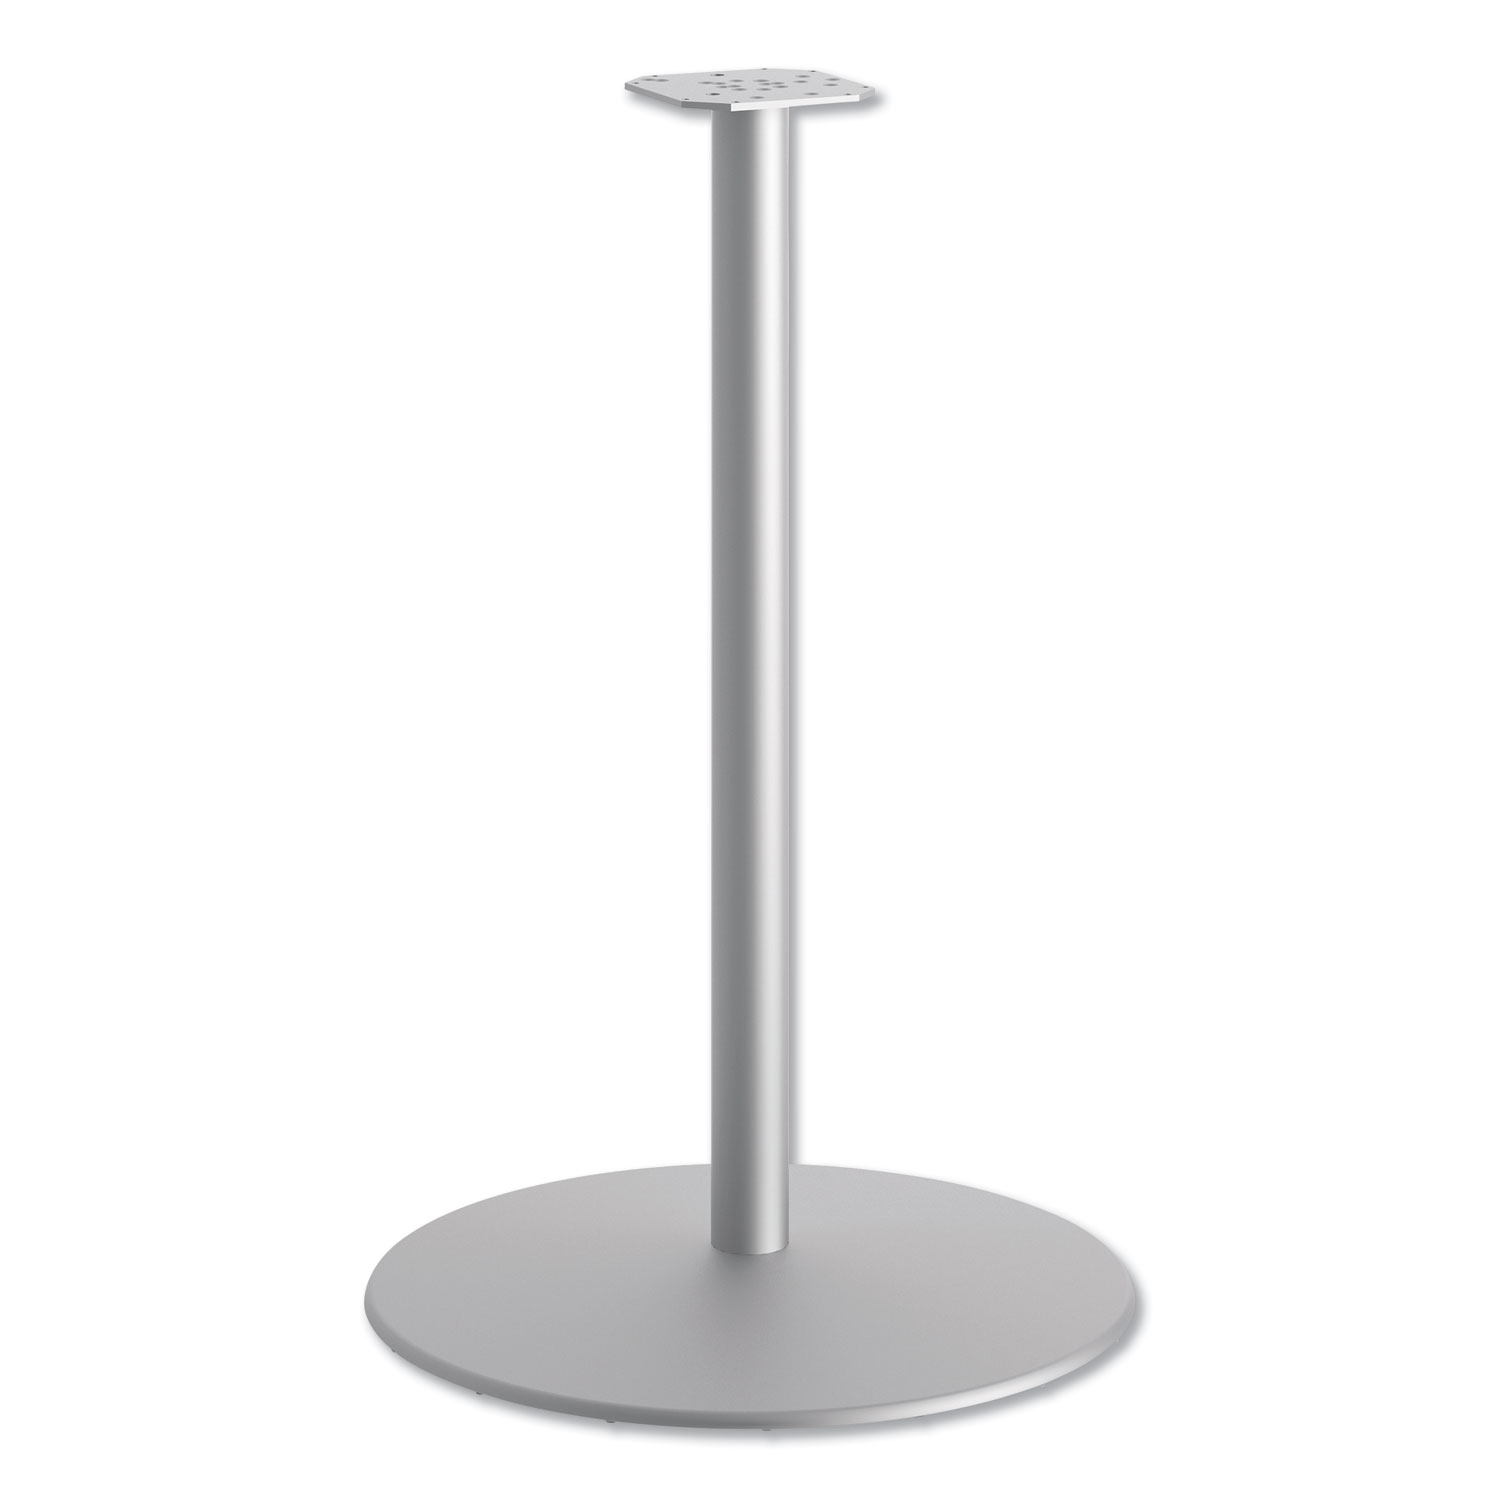  HON HONHBTTD42 Between Round Disc Base for 42 Table Tops, Textured Silver (HONHBTTD42) 